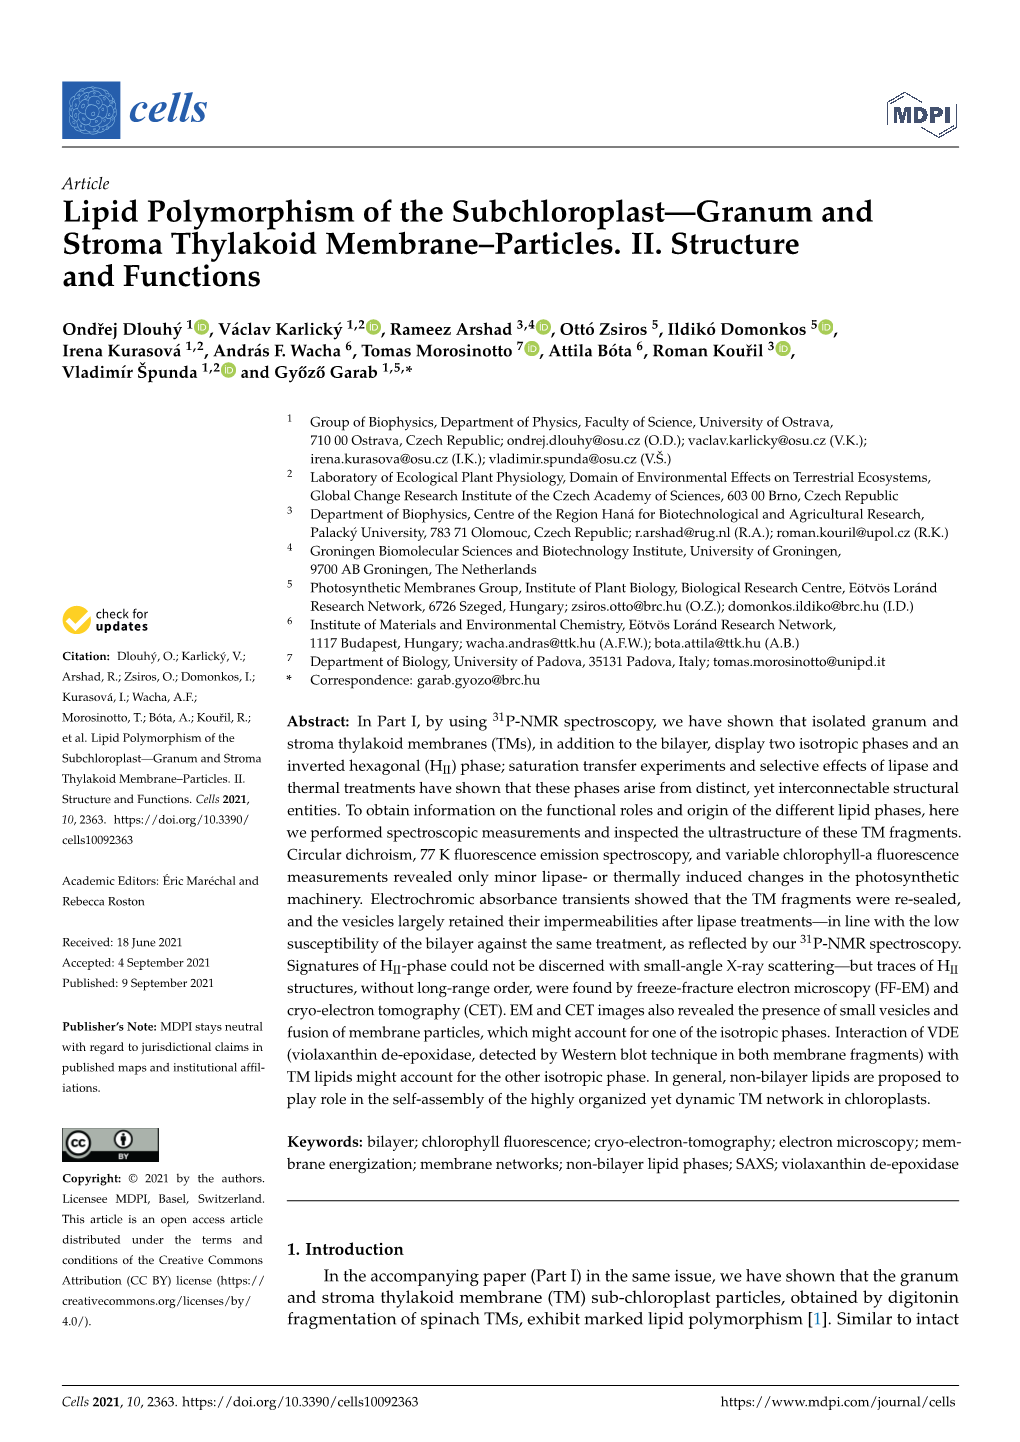 Lipid Polymorphism of the Subchloroplast—Granum and Stroma Thylakoid Membrane–Particles. II. Structure and Functions